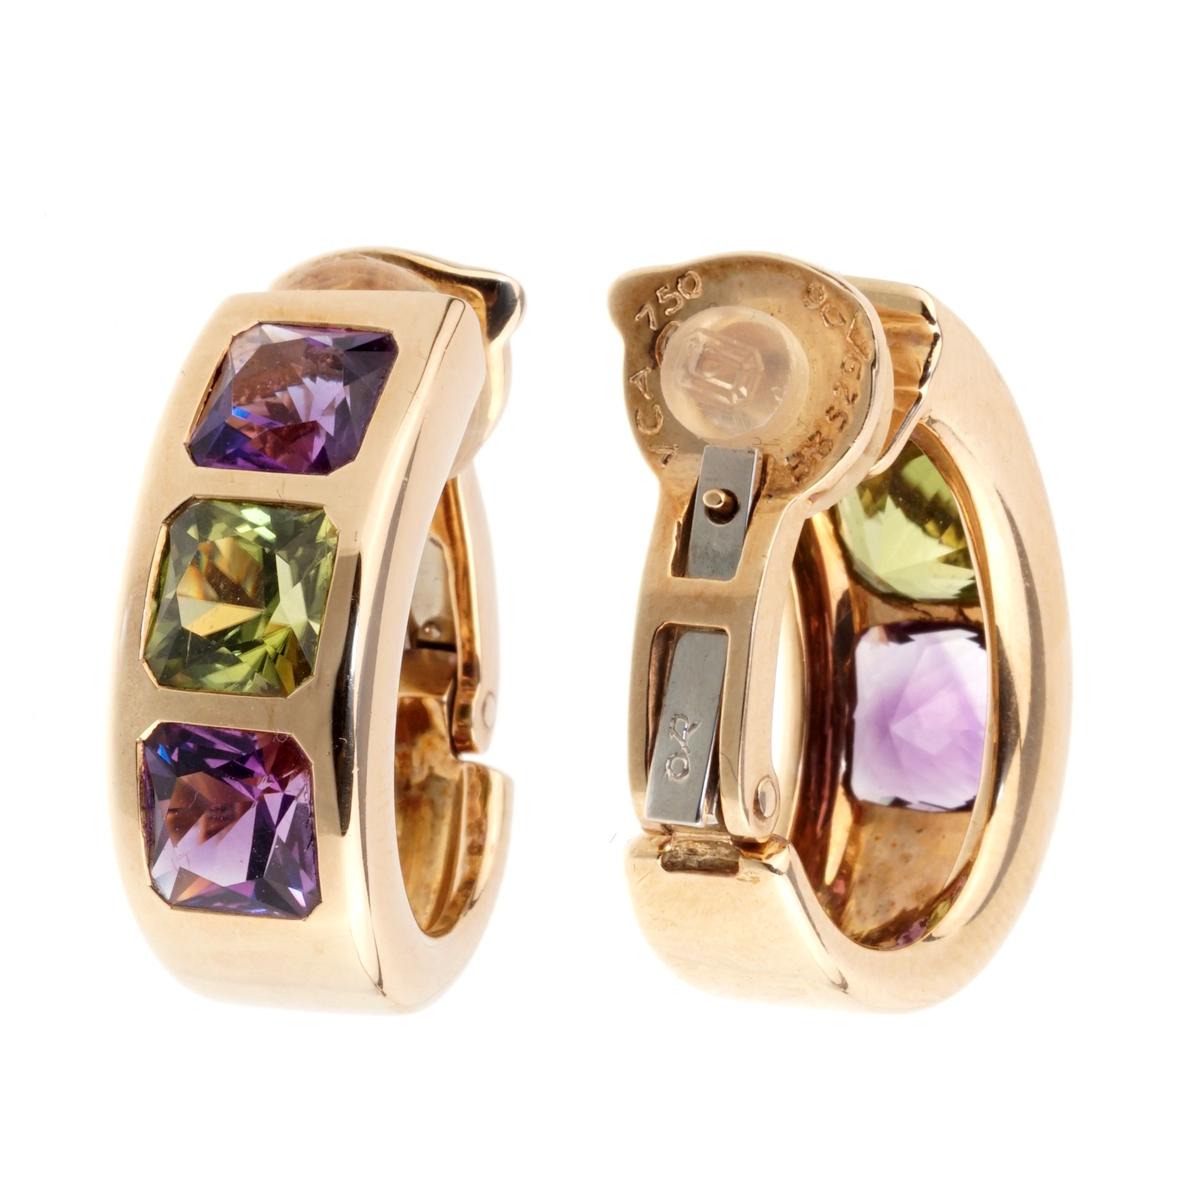 A fabulous pair of Van Cleef & Arpels earrings featuring amethyst and peridot set in 18k yellow gold.